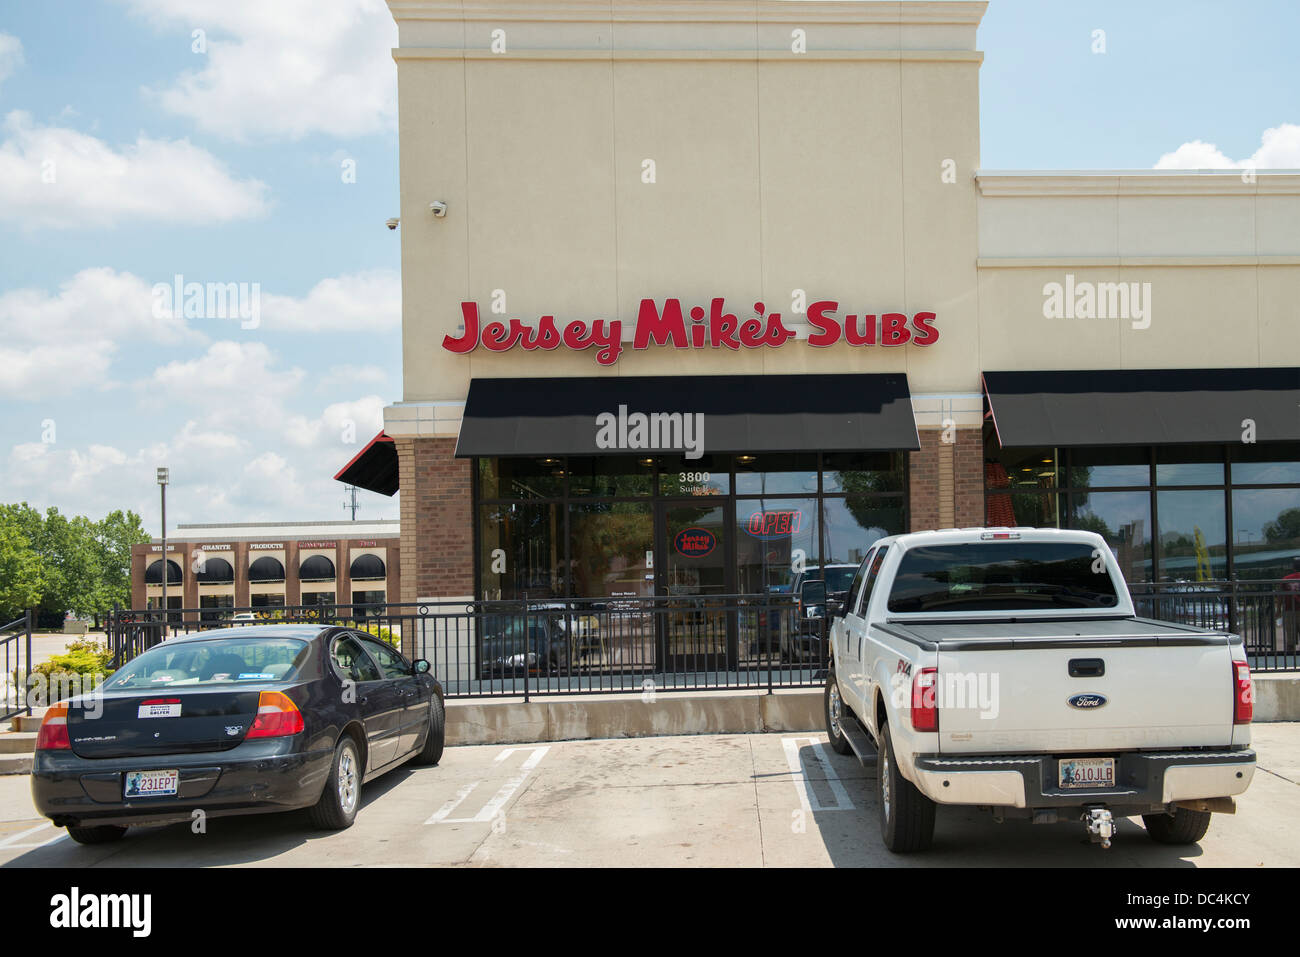 The exterior of a sub sandwich shop in Oklahoma City, Oklahoma, USA called Jersey Mike's Subs. Stock Photo